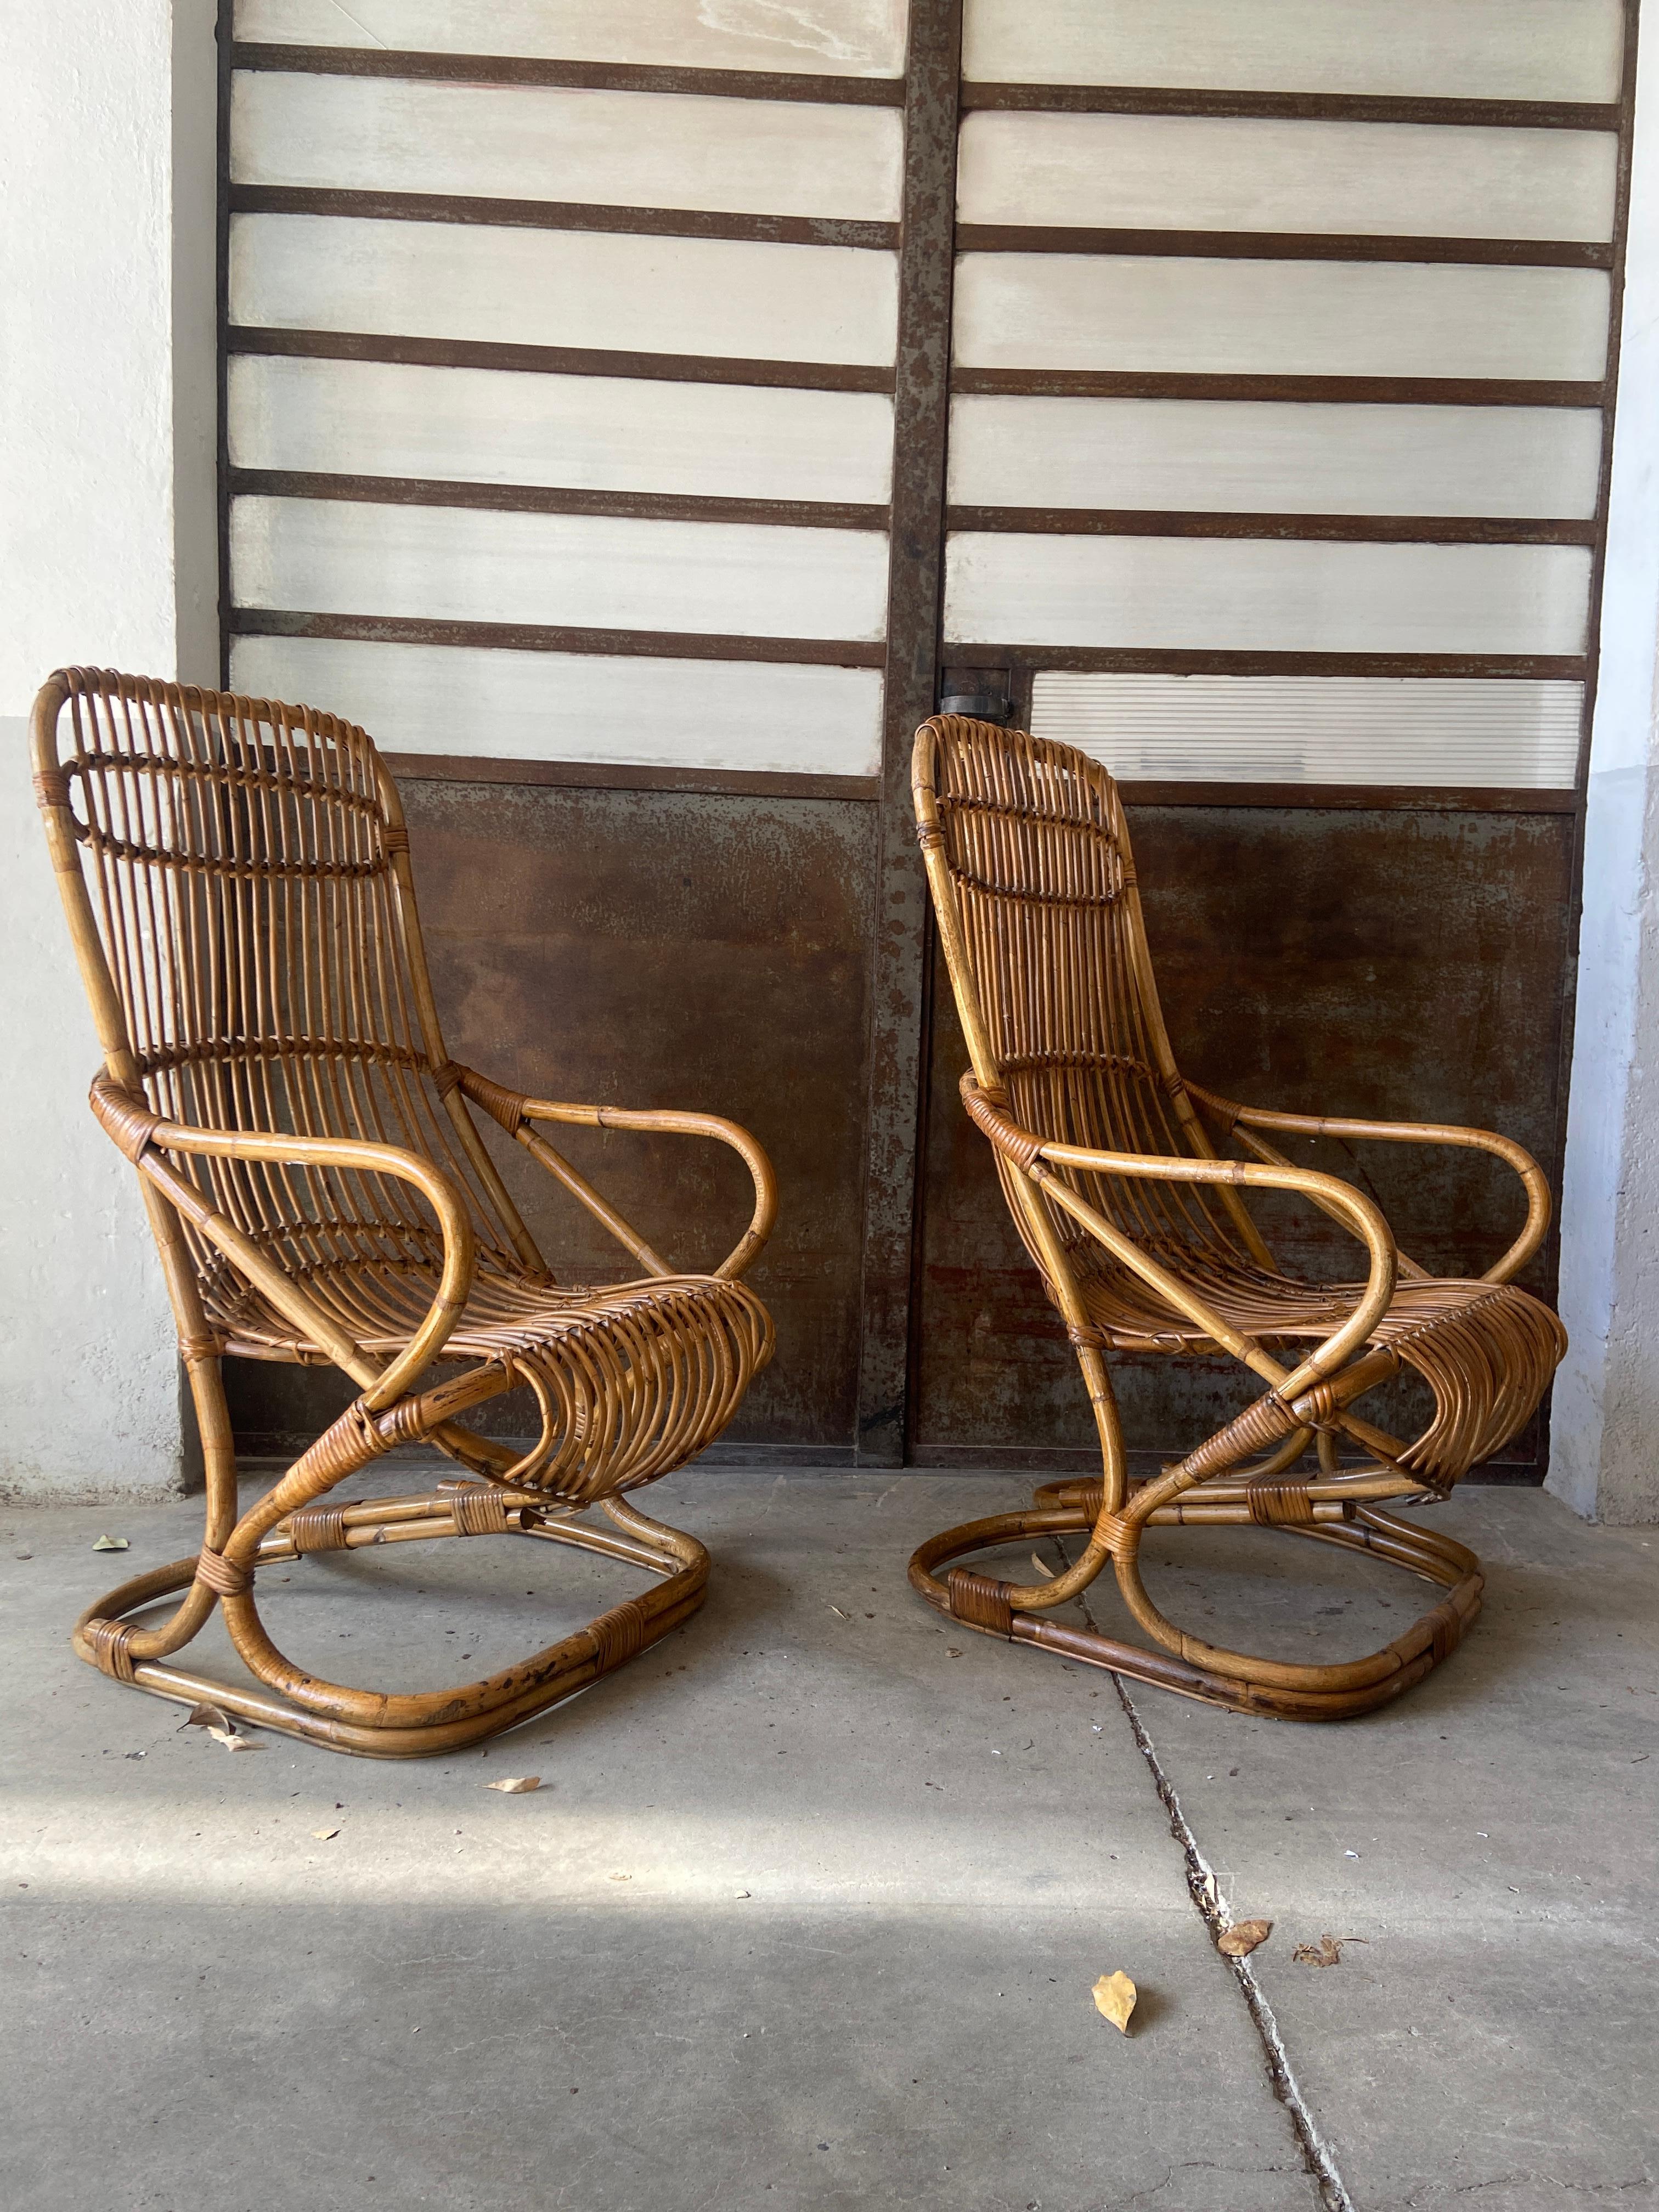 Mid-Century Modern pair of Italian bamboo and rattan armchairs by Tito Agnoli for Bonacina. 1960s
The Armchairs are in really good vintage condition with a beautiful patina due to age and use.